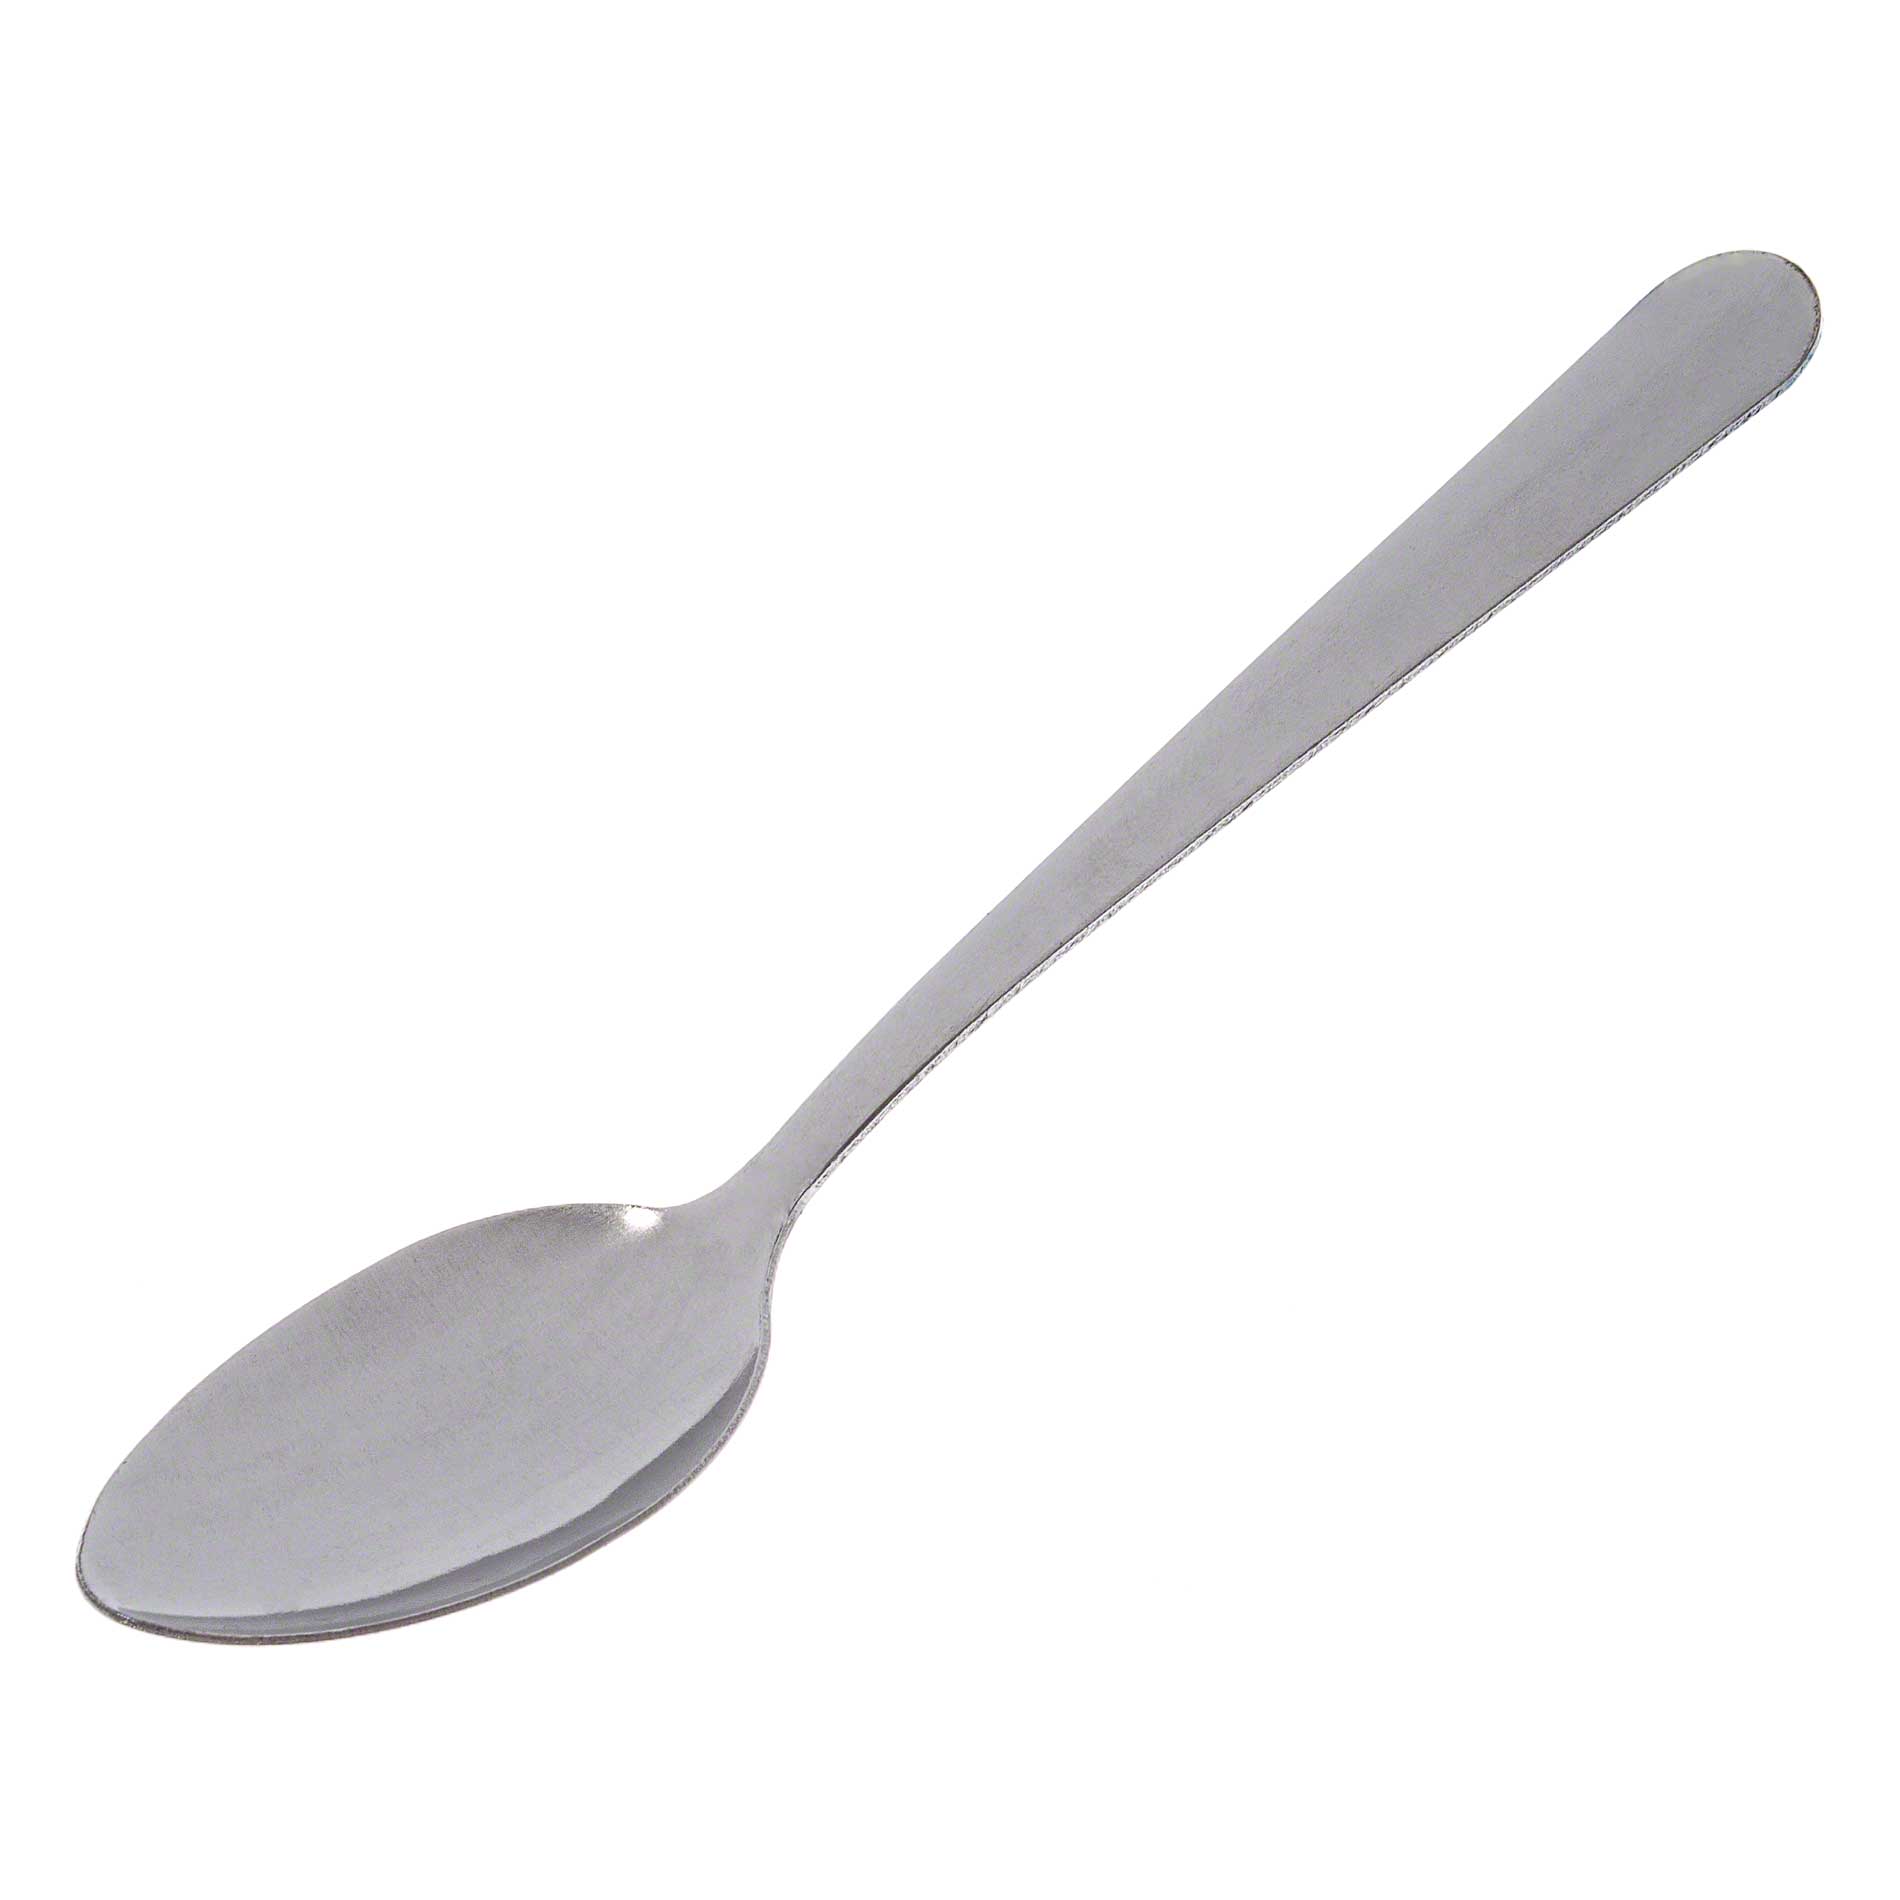 Free Silver Spoon Cliparts, Download Free Clip Art, Free